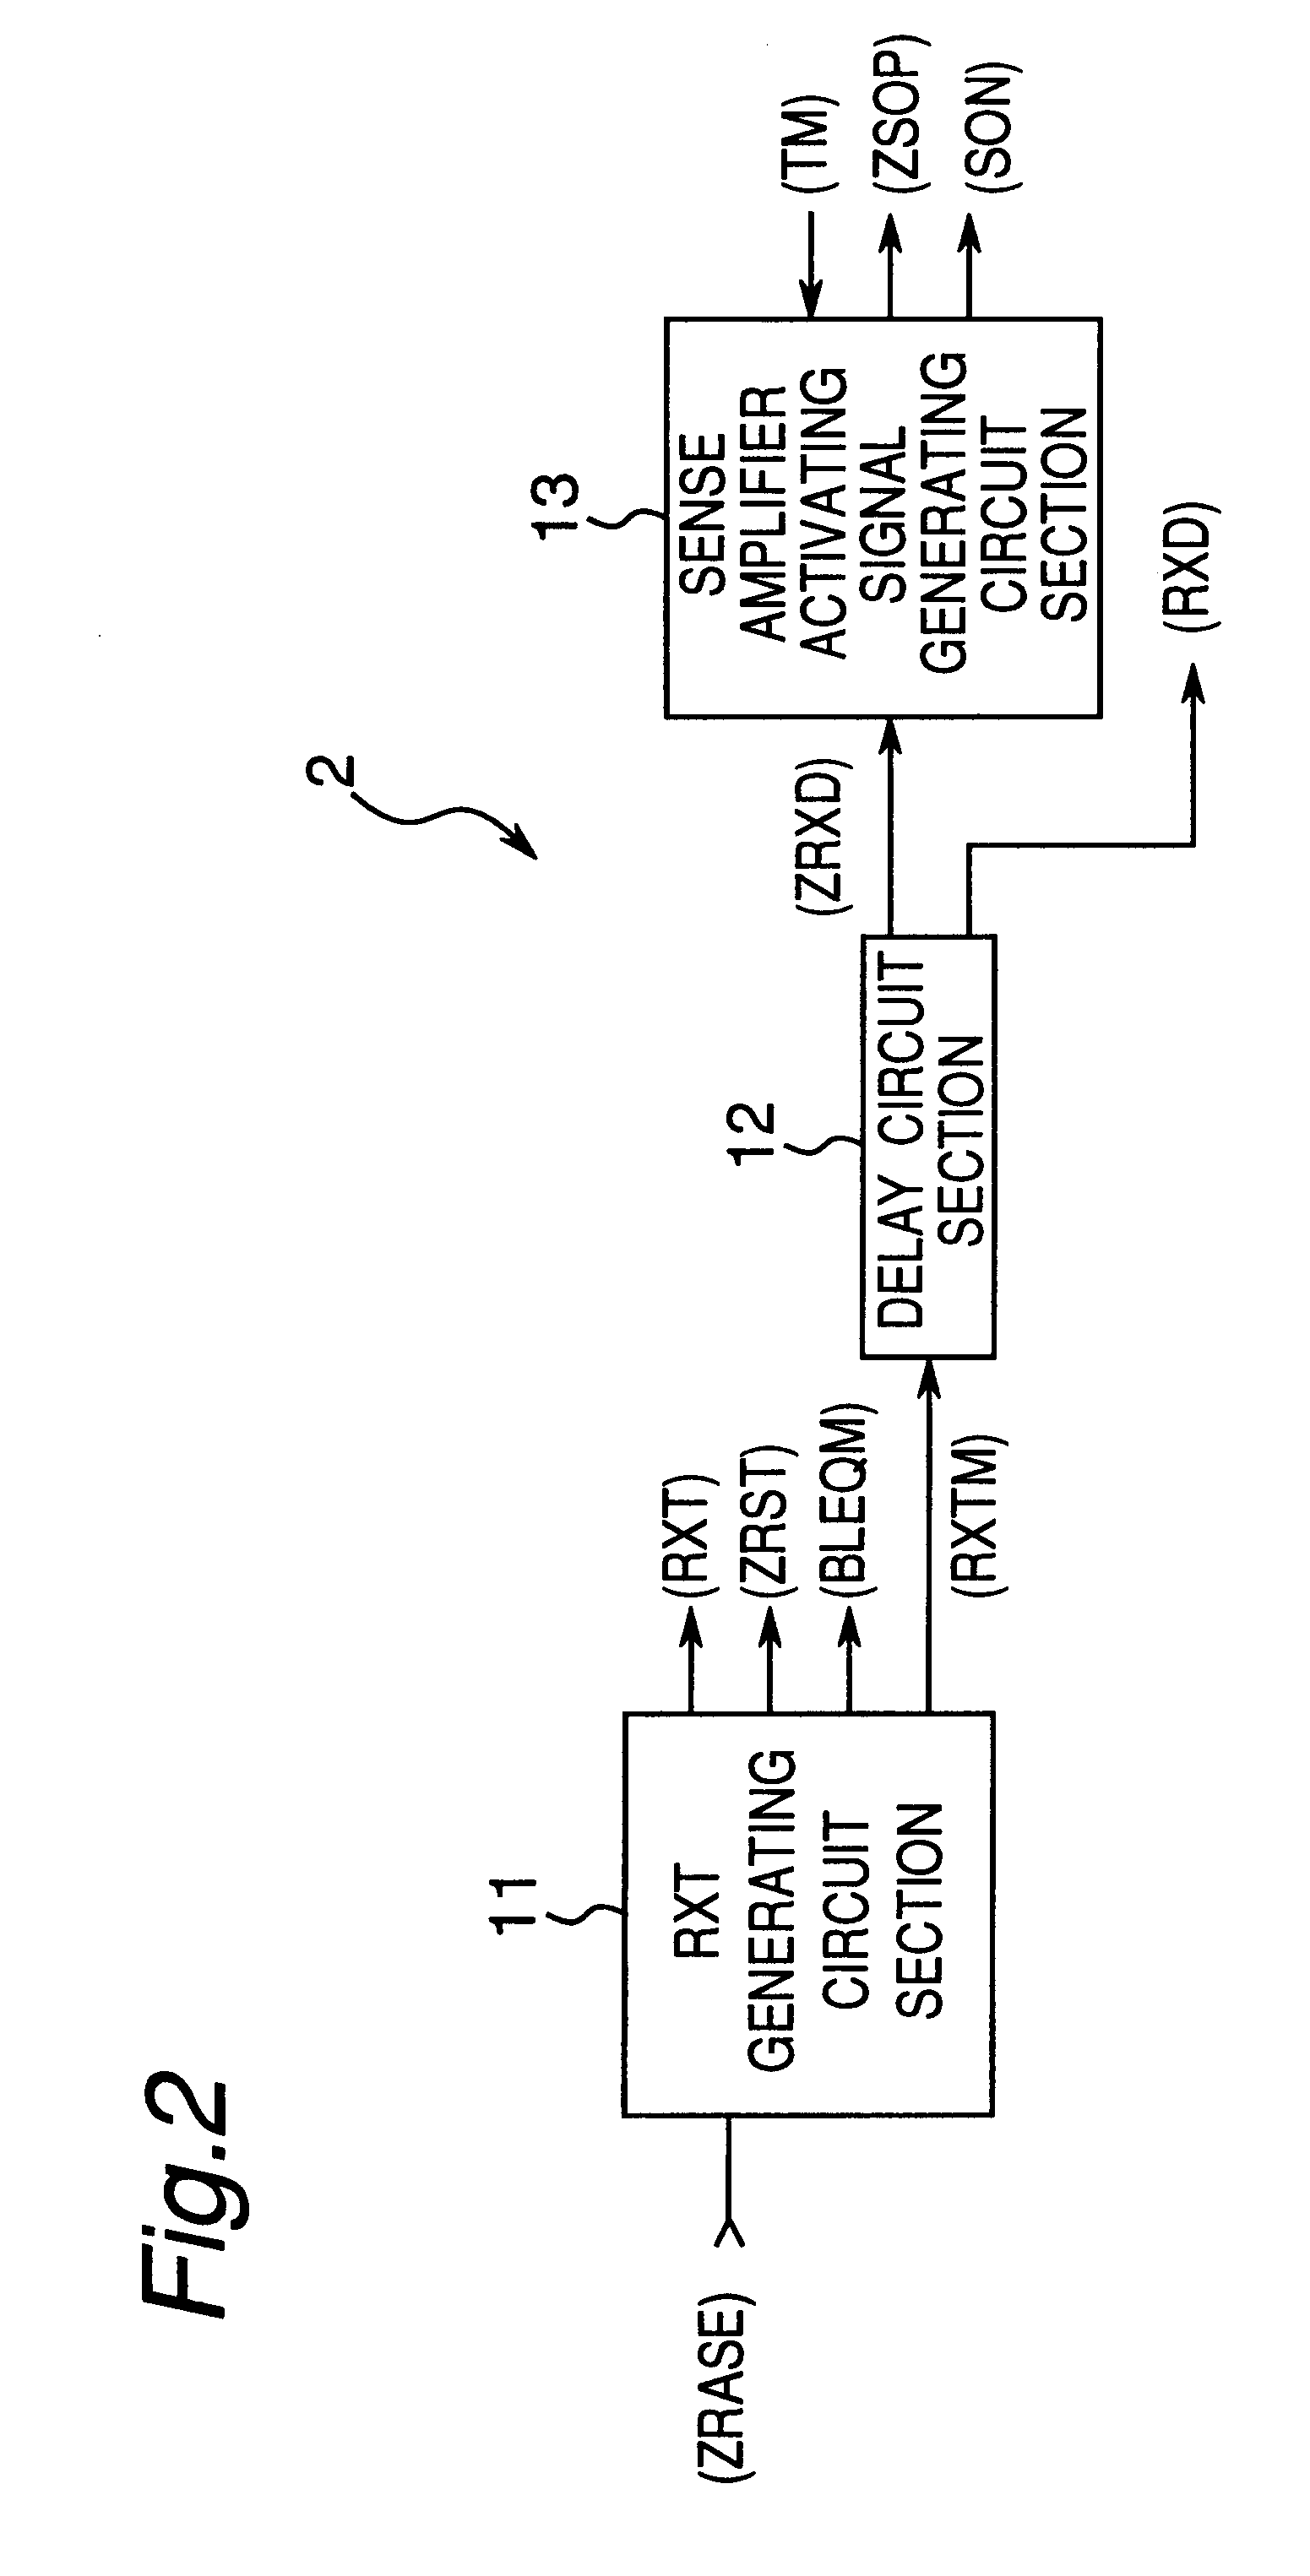 Semiconductor storage device having a delayed sense amplifier activating signal during a test mode